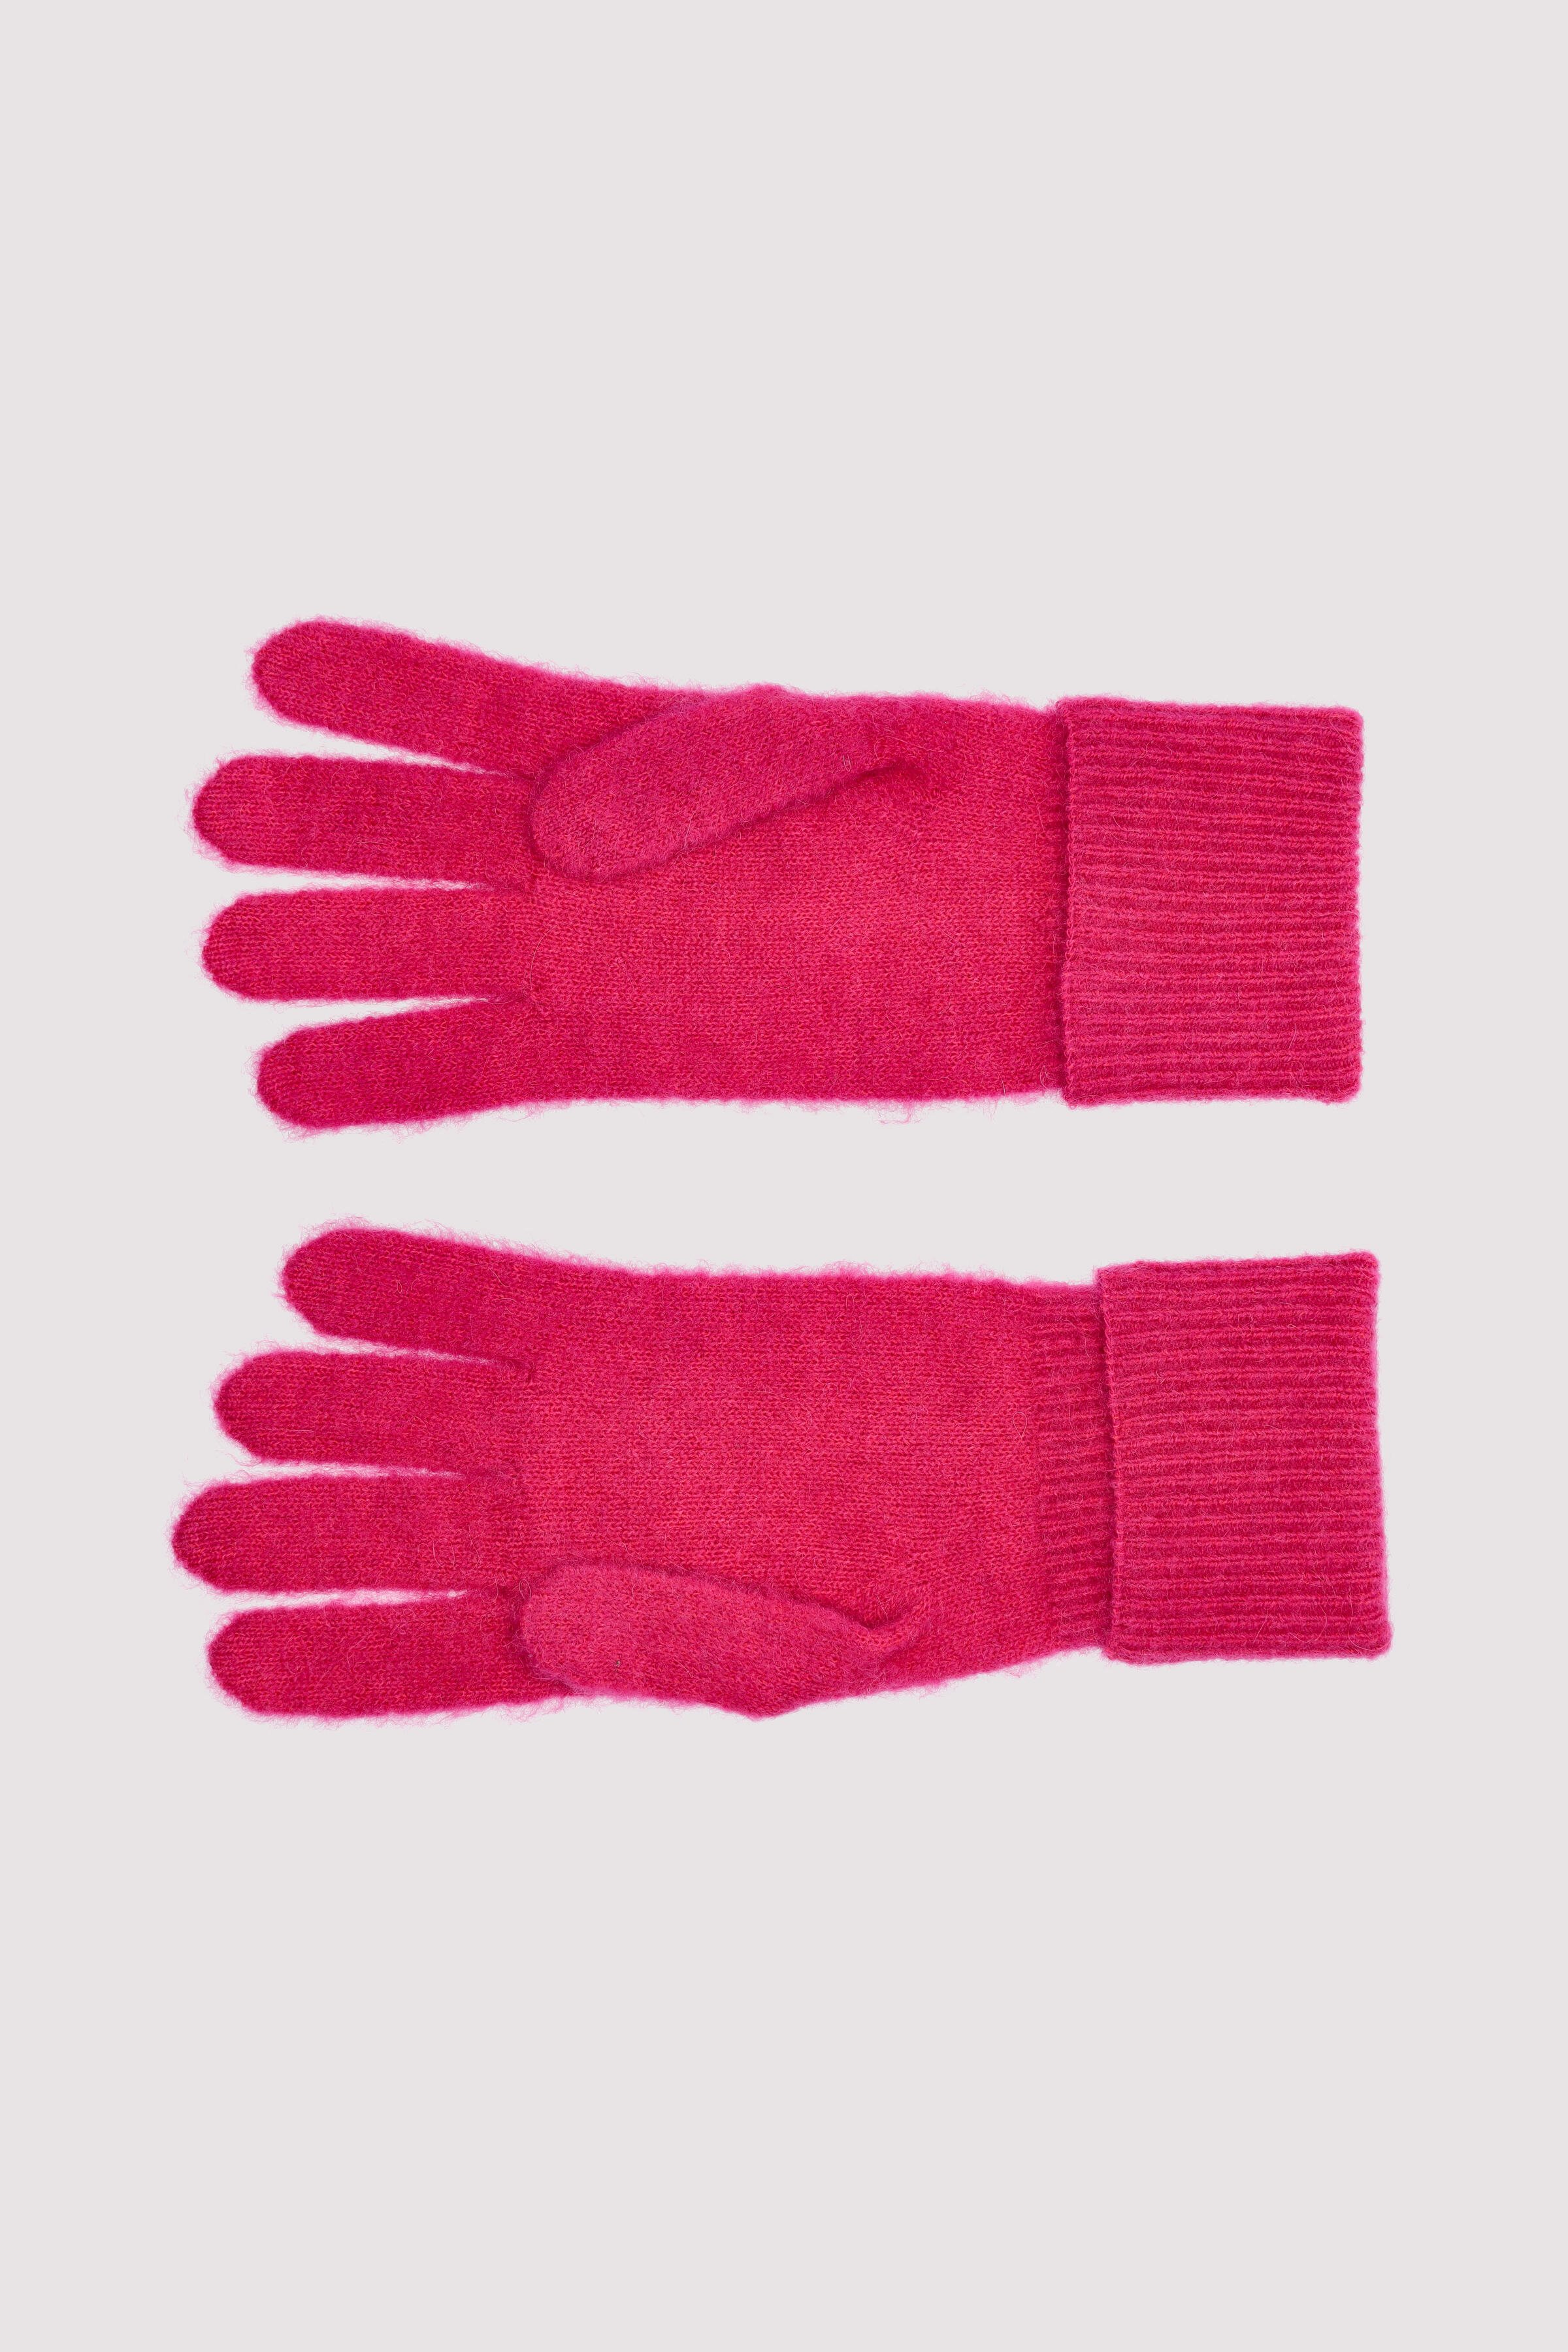 Gloves, knitted, fold-up in ha